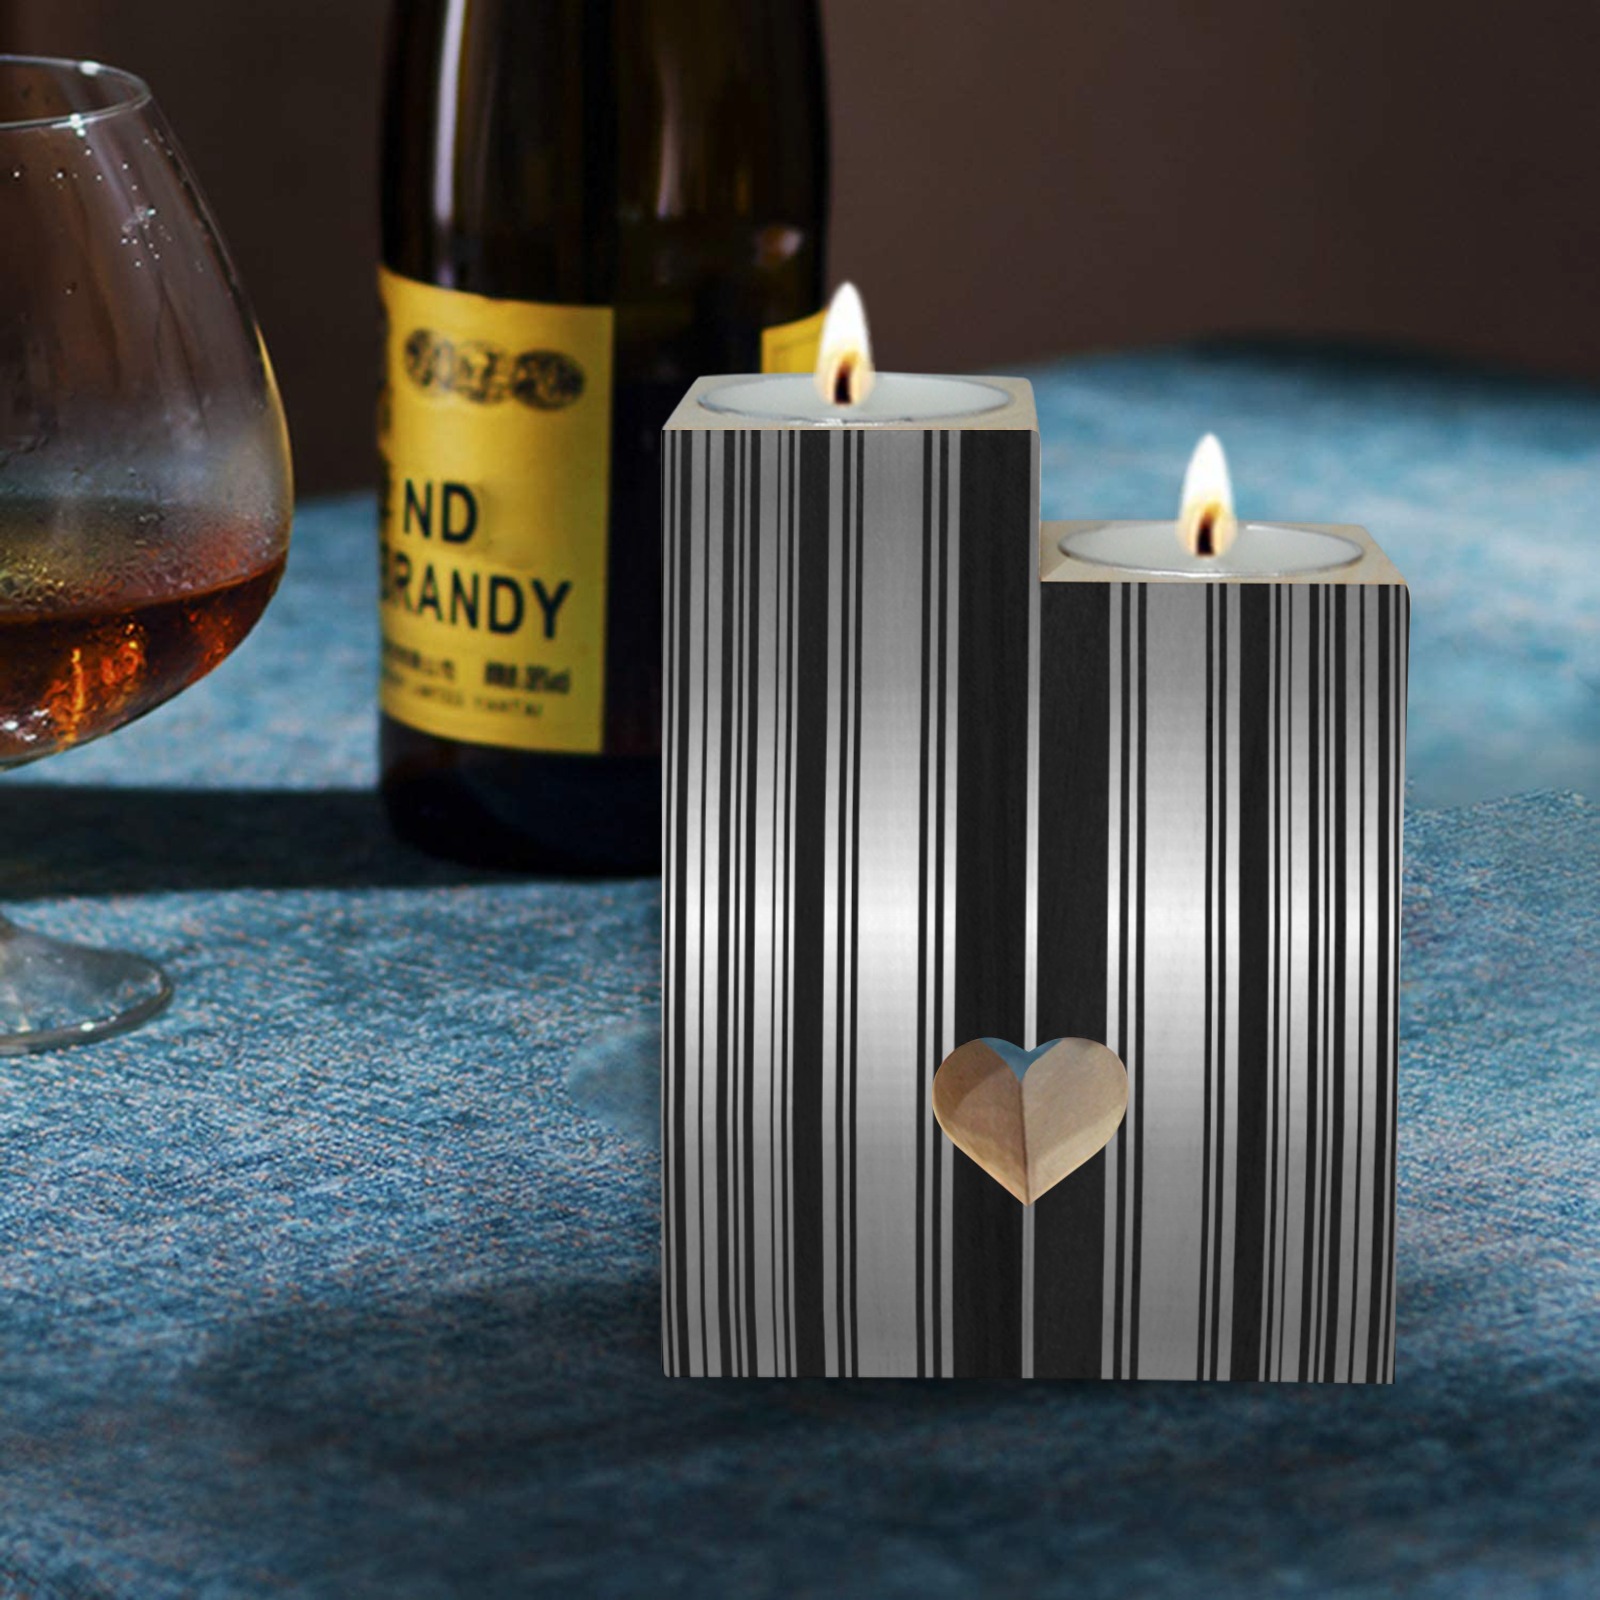 Sheen Wooden Candle Holder (Without Candle)